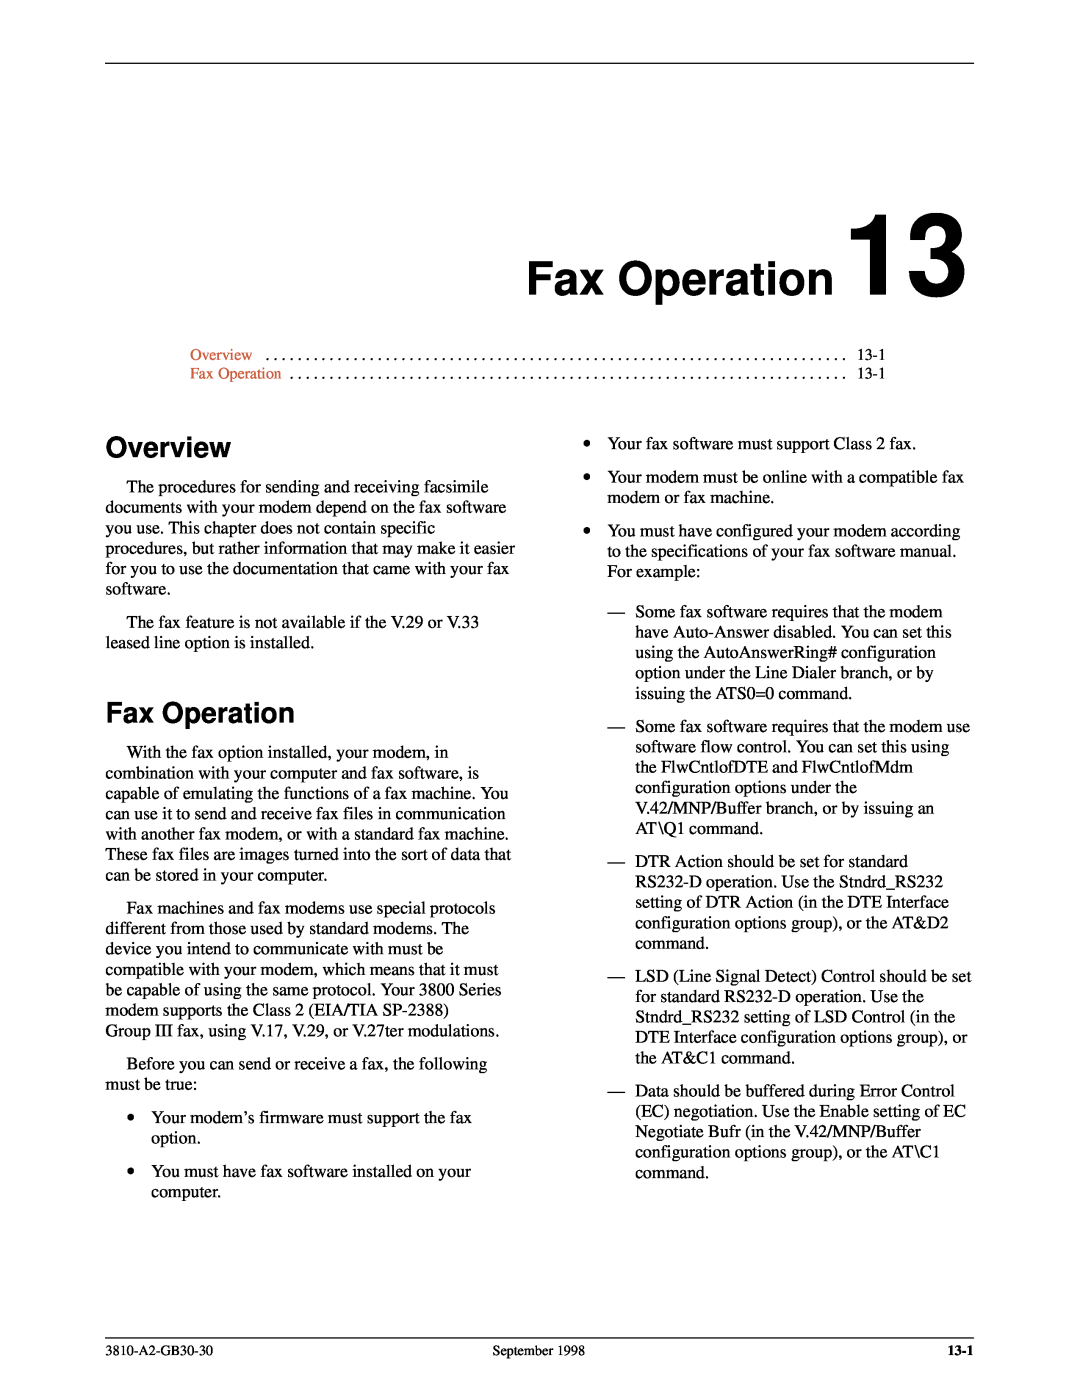 Paradyne 3800 manual Fax Operation, Overview 